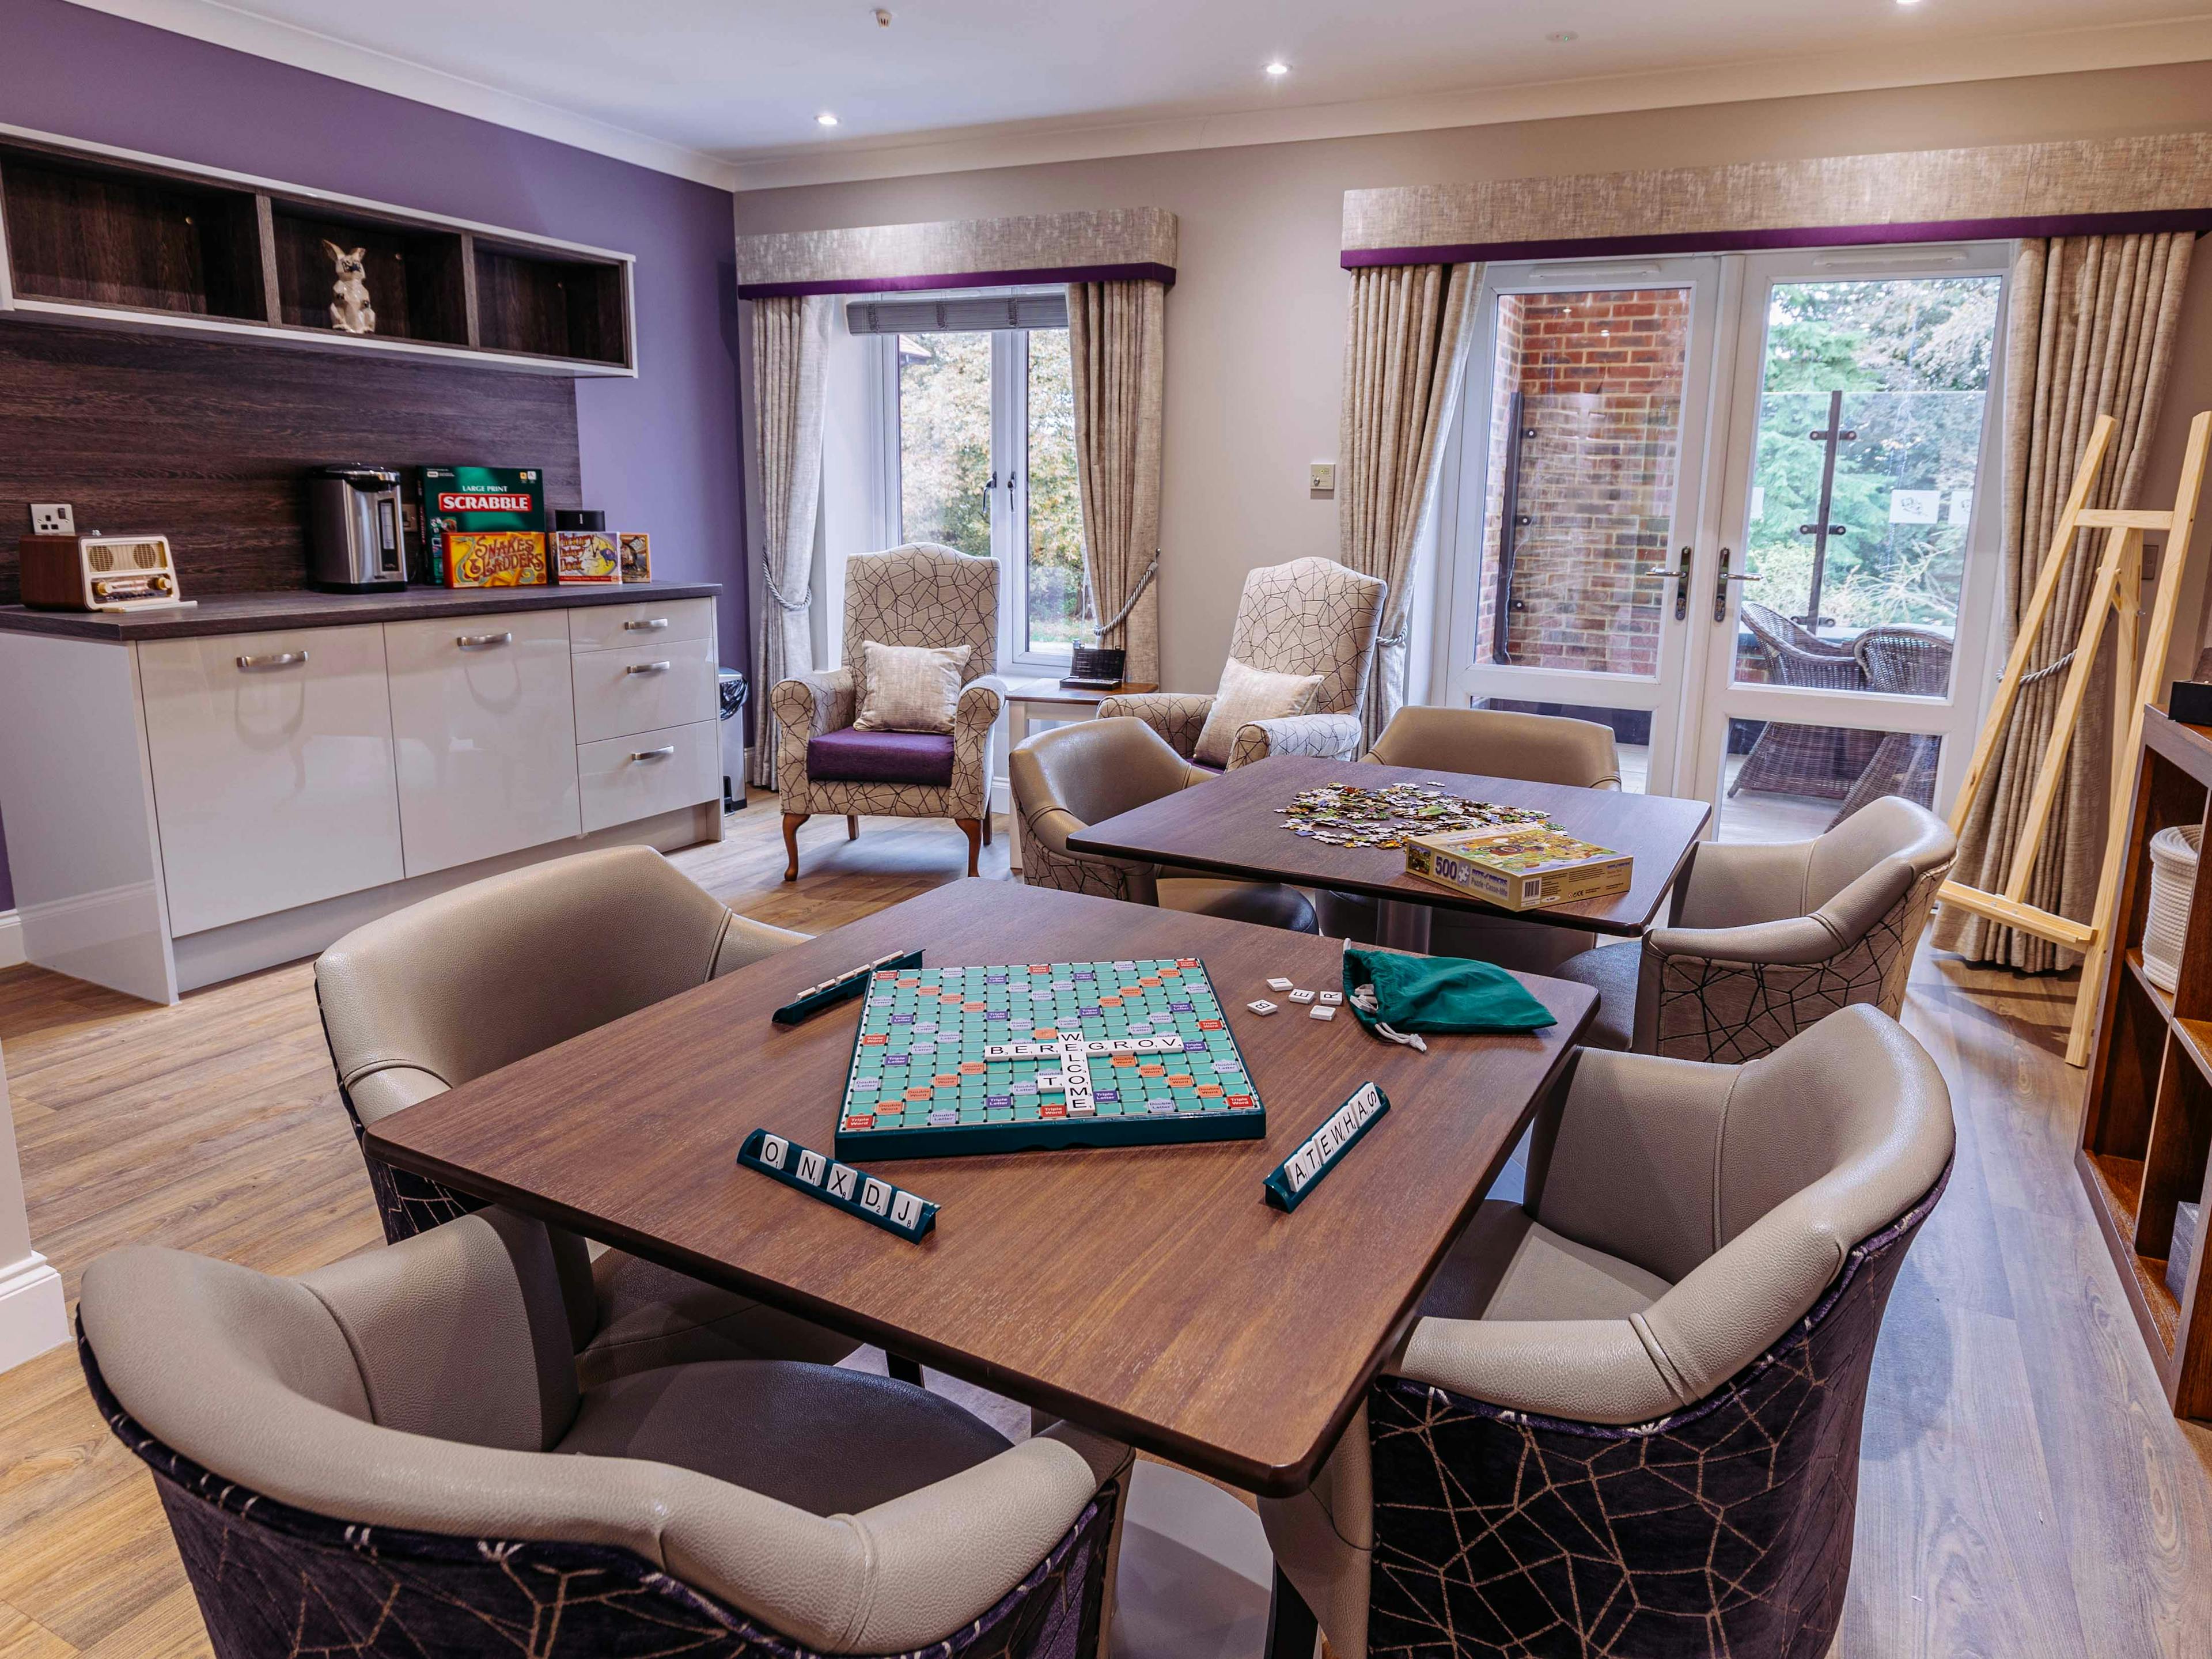 Activity Room at Bere Grove Care Home in Horndean, East Hampshire